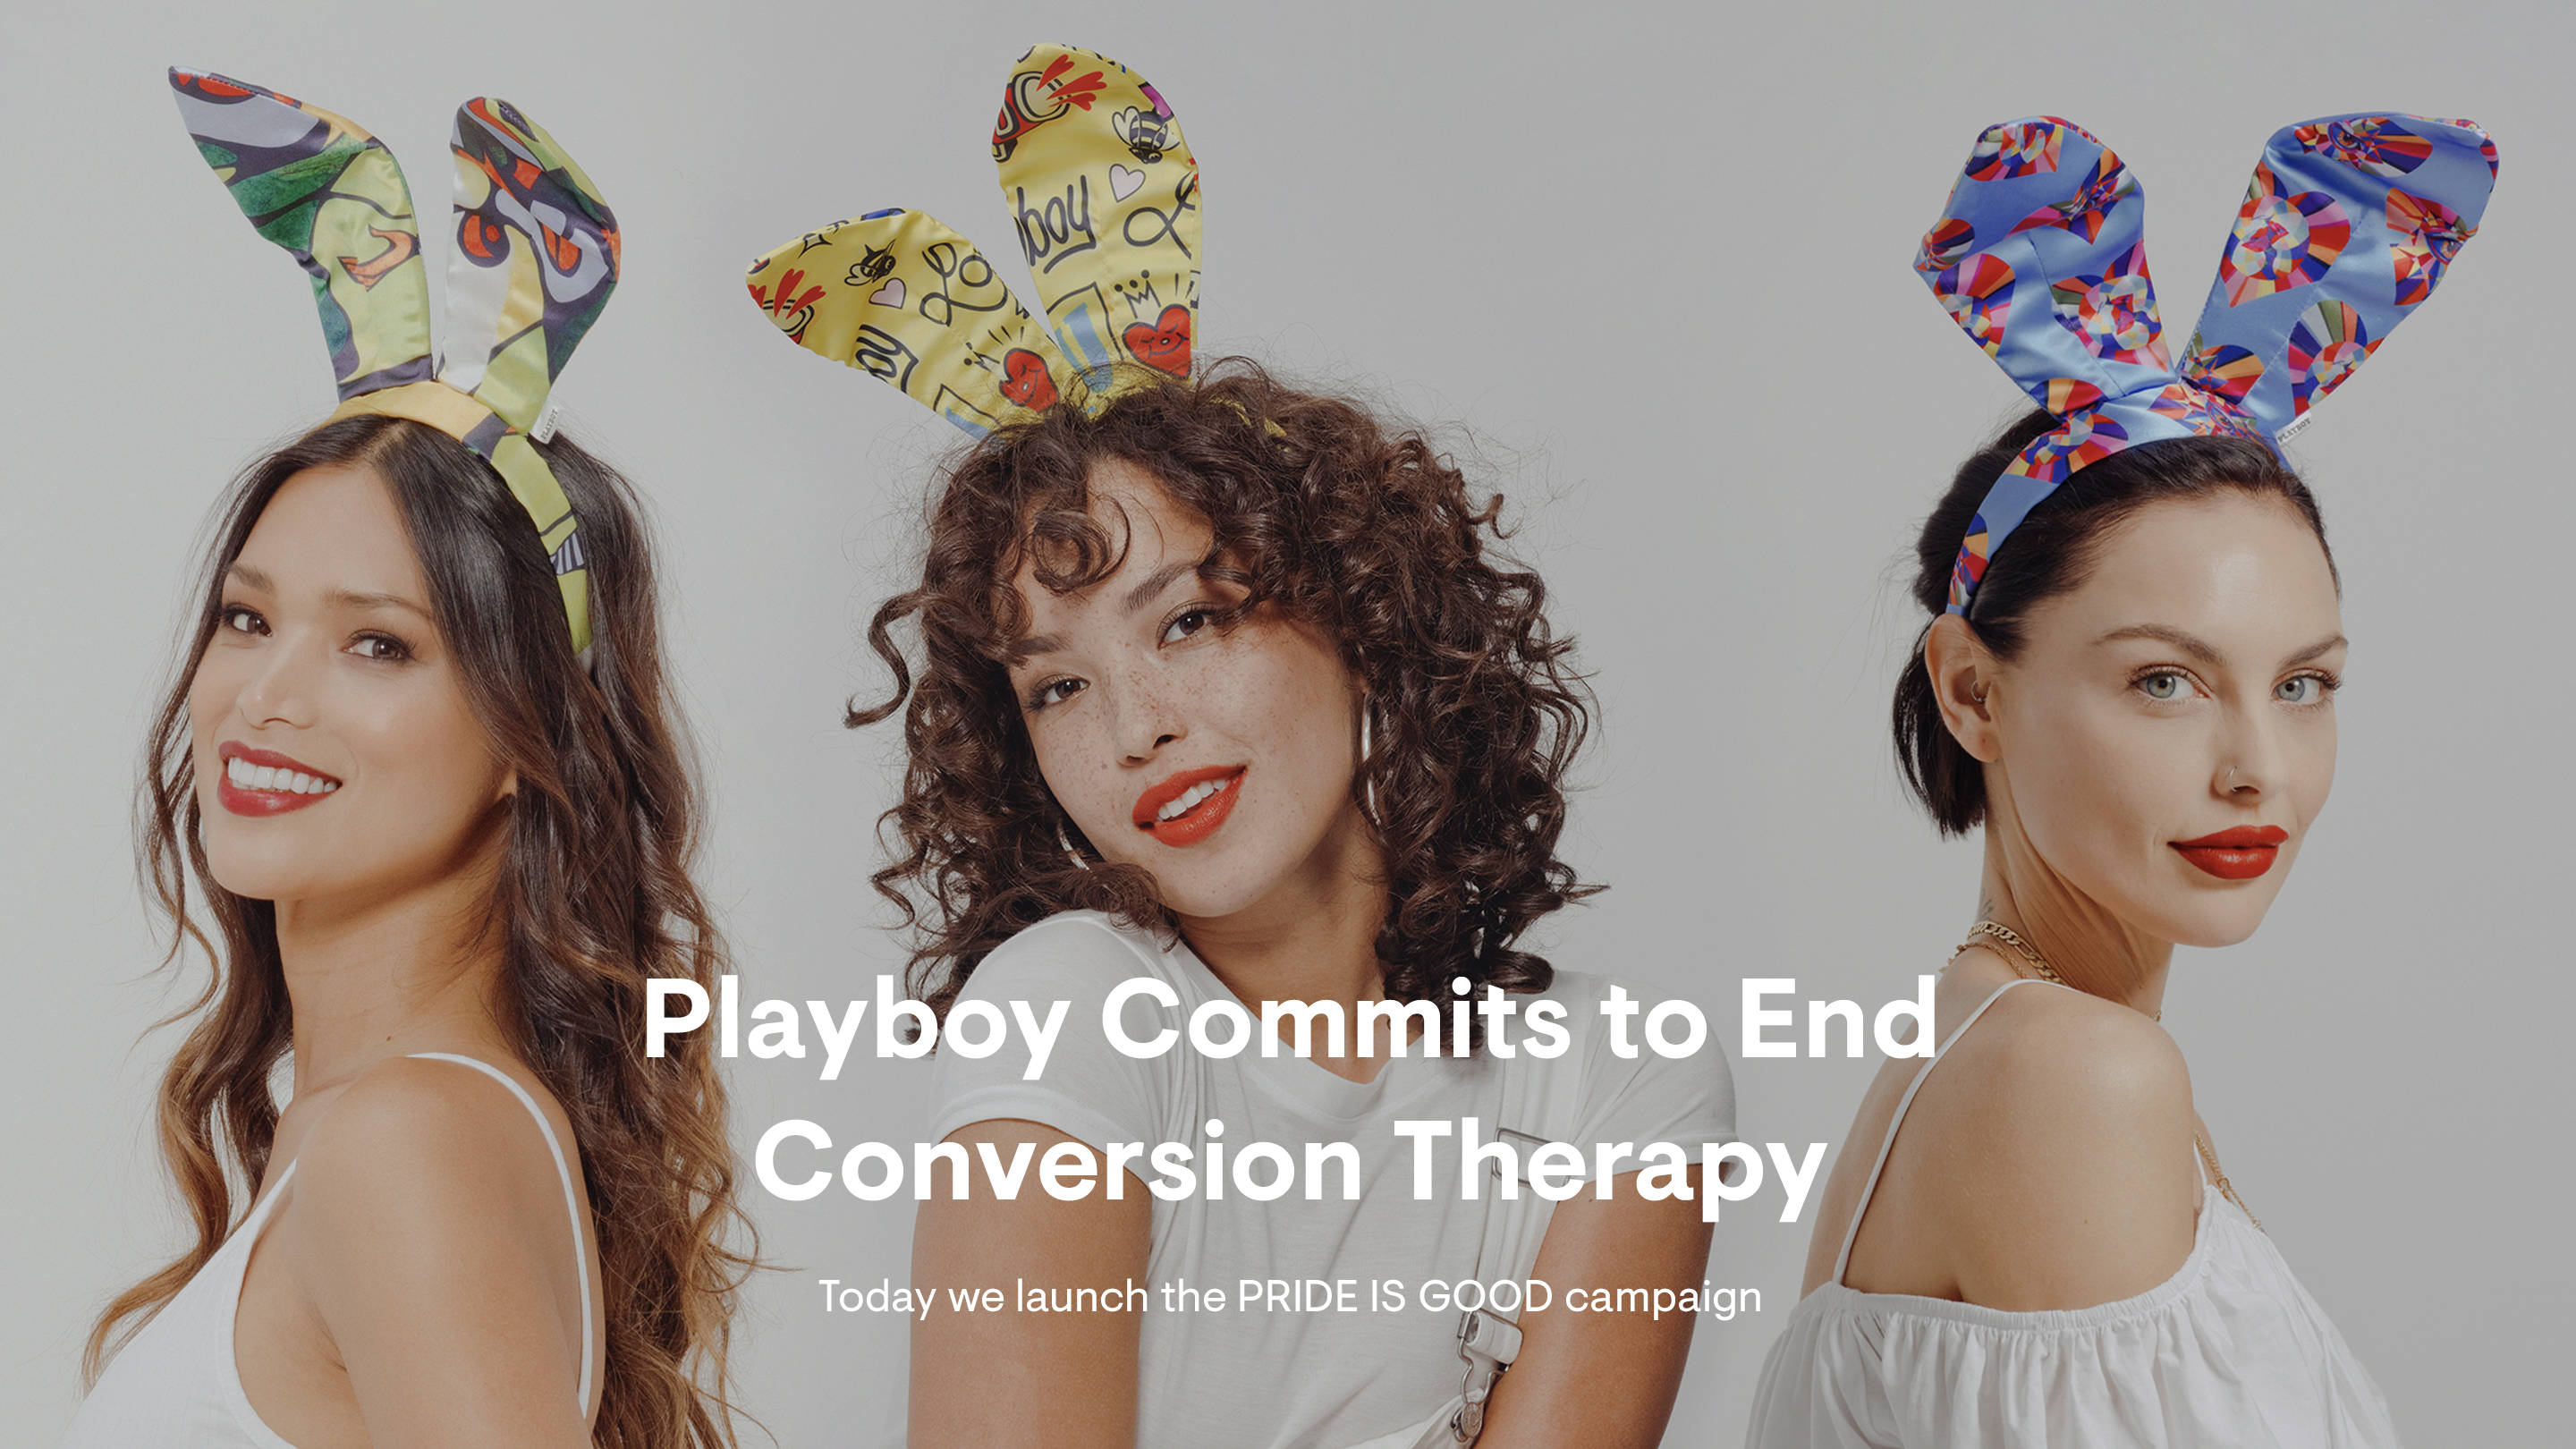 Playboy launches PRIDE IS GOOD campaign